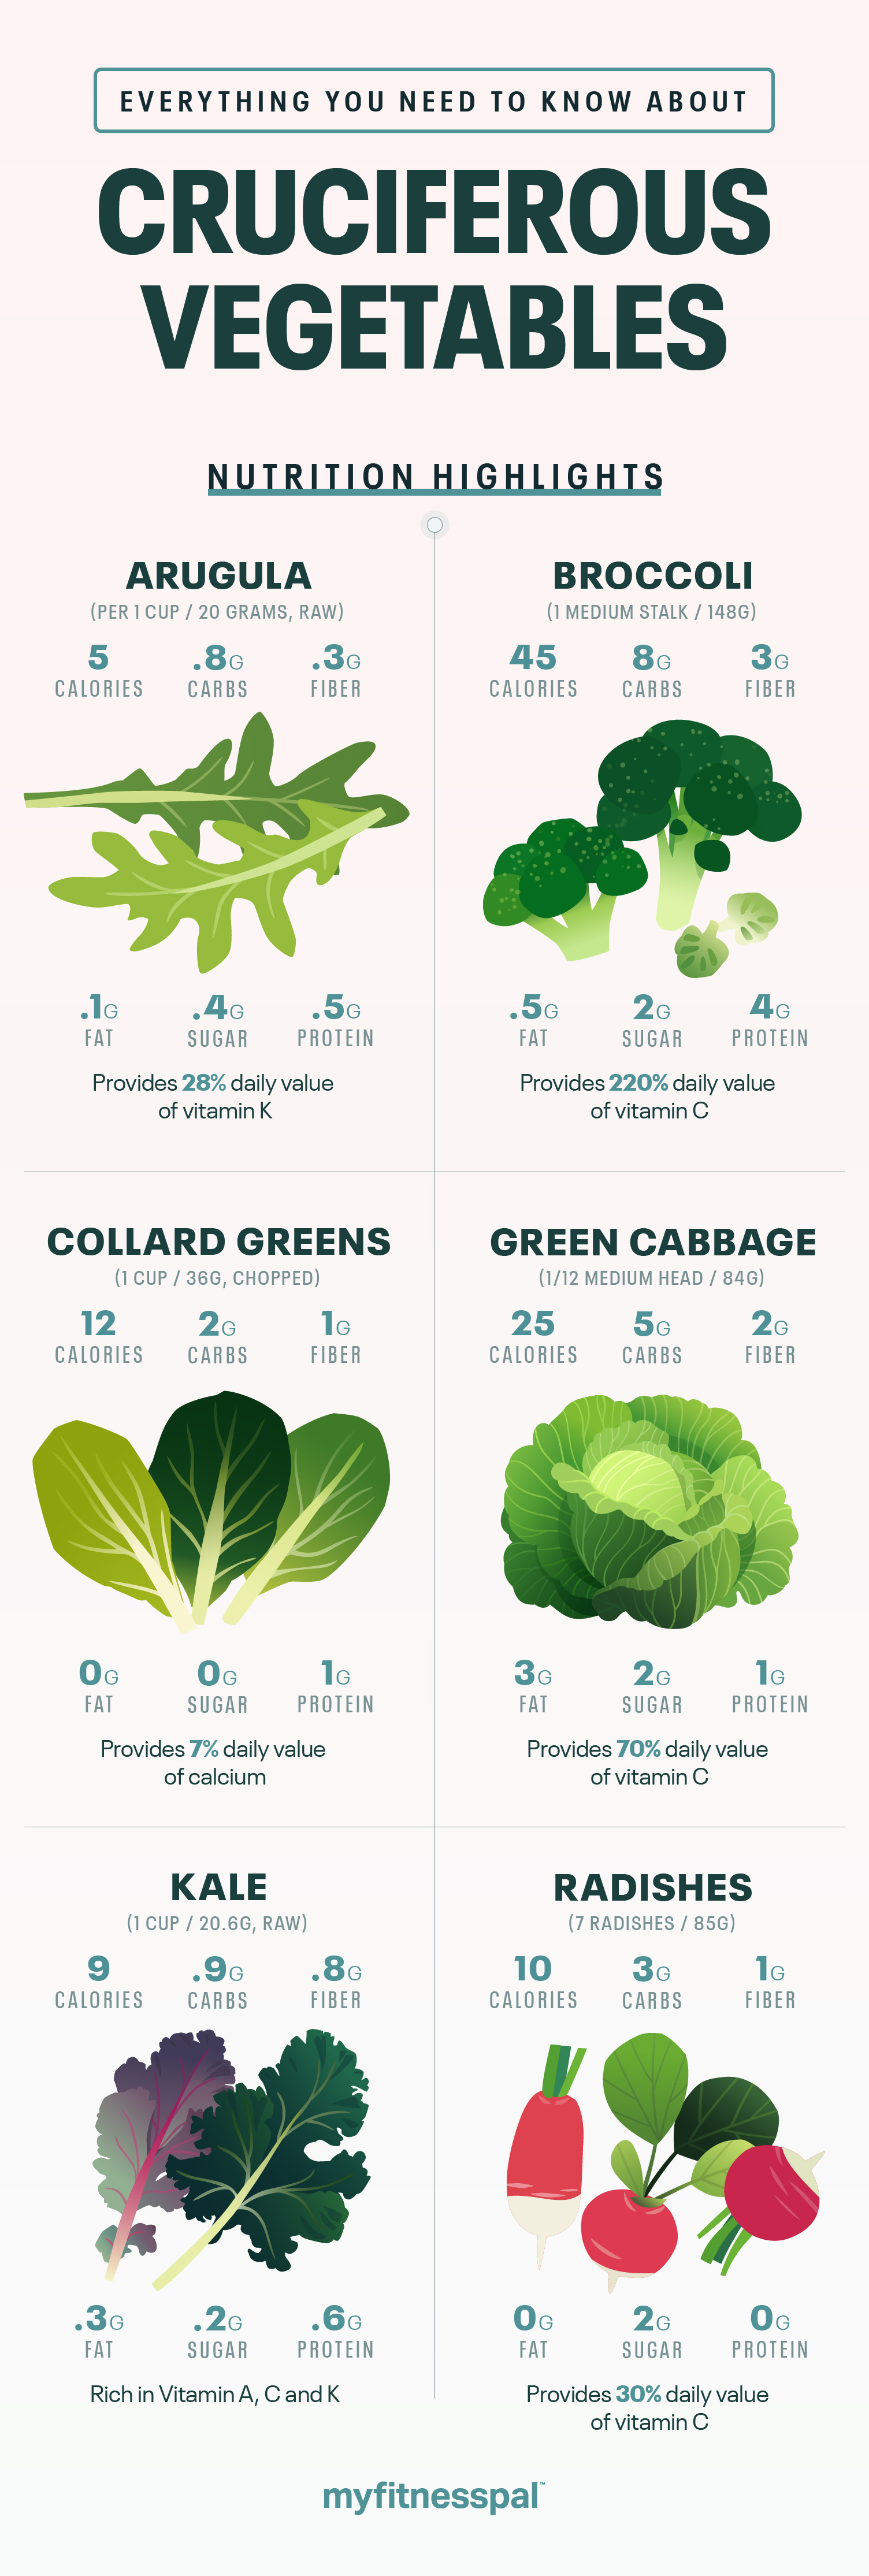 Everything You Need to Know About Cruciferous Veggies